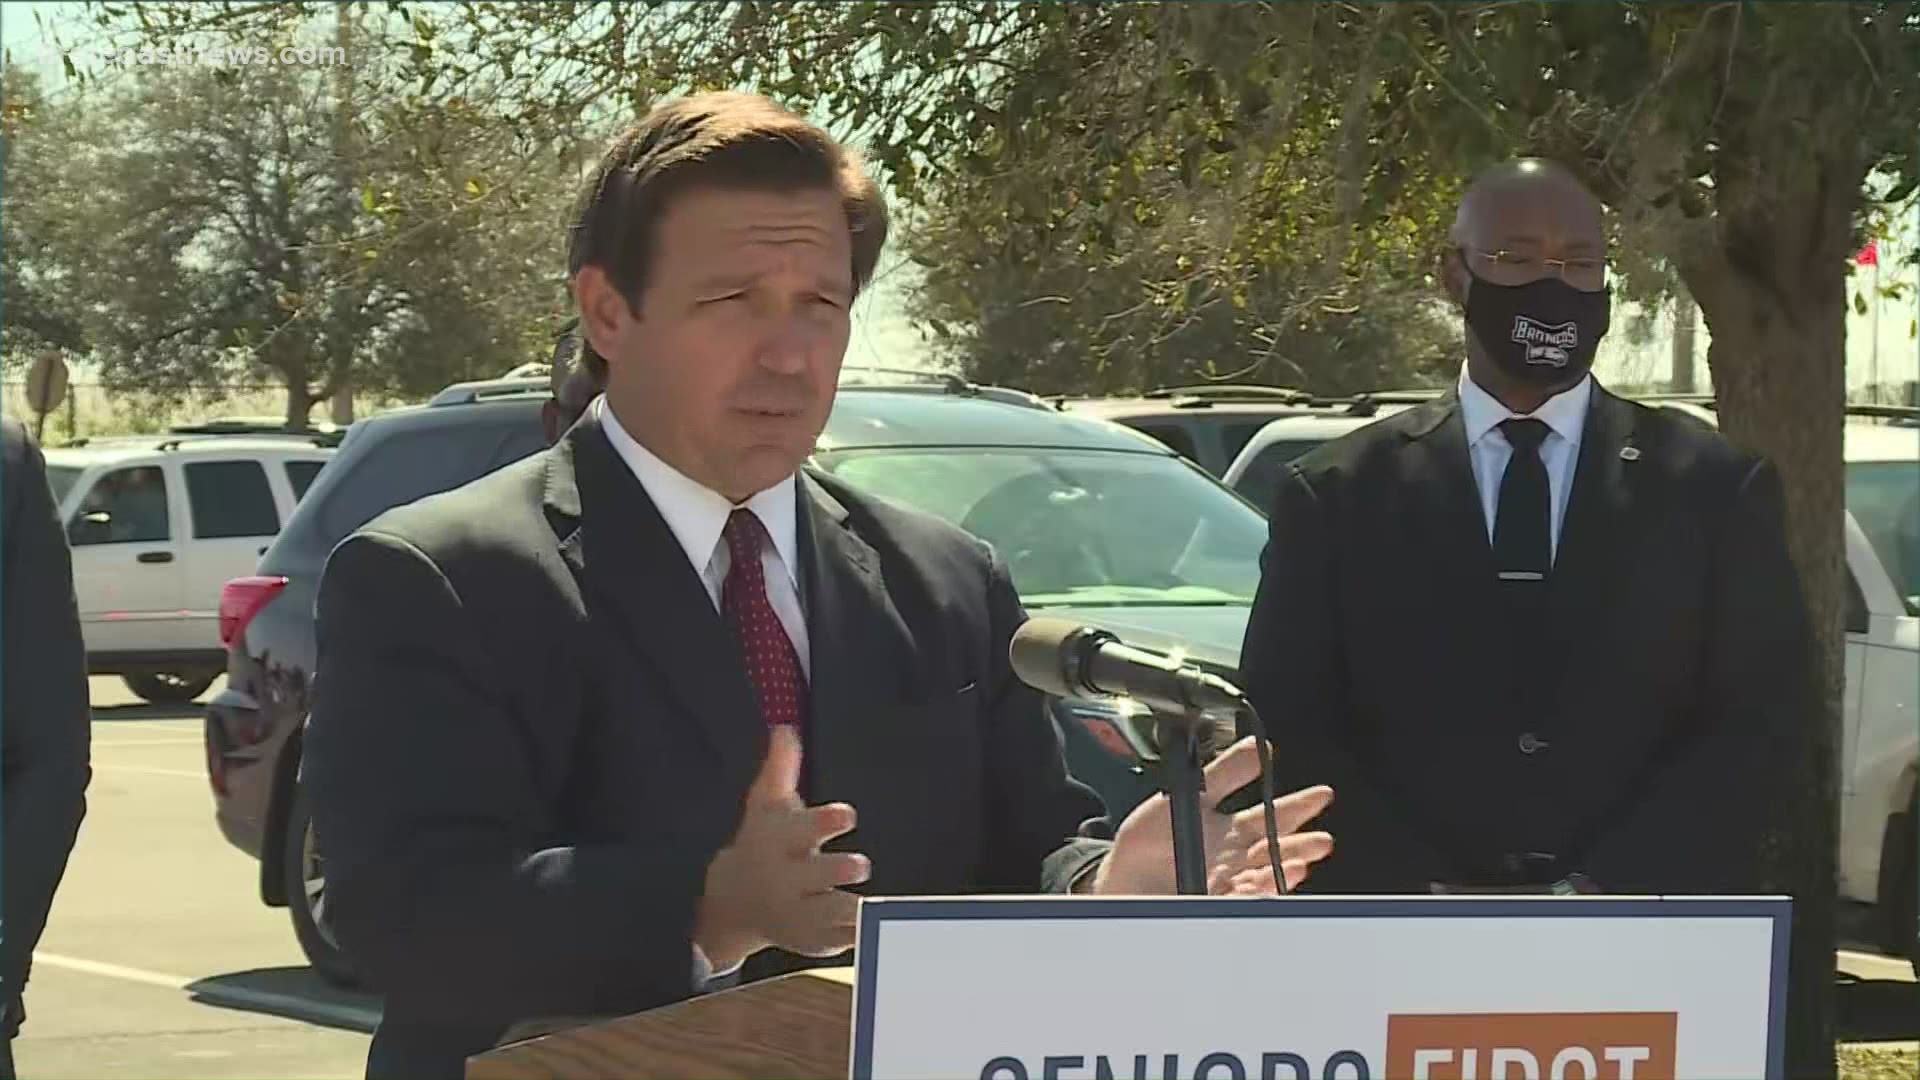 Gov. DeSantis hosted a news conference in Florida on Wednesday regarding COVID-19.